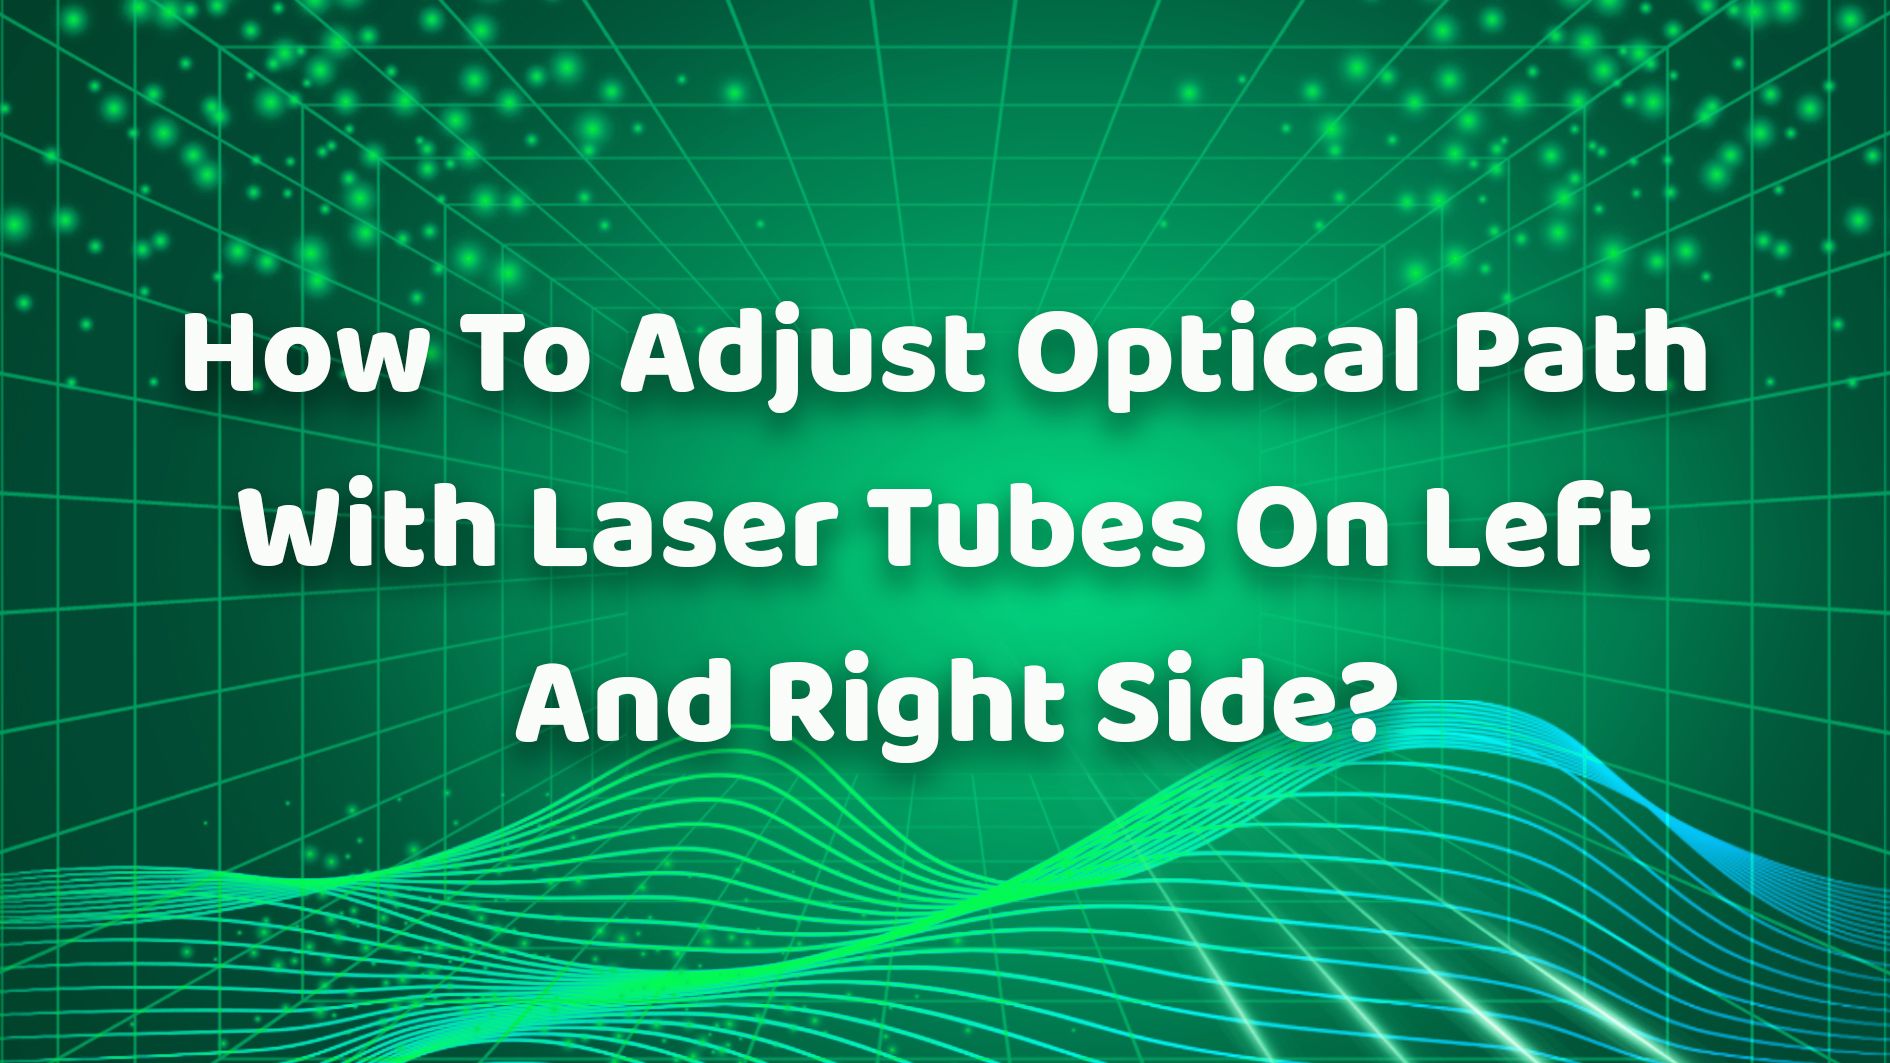 How To Adjust Optical Path With Laser Tubes On Left And Right Side？